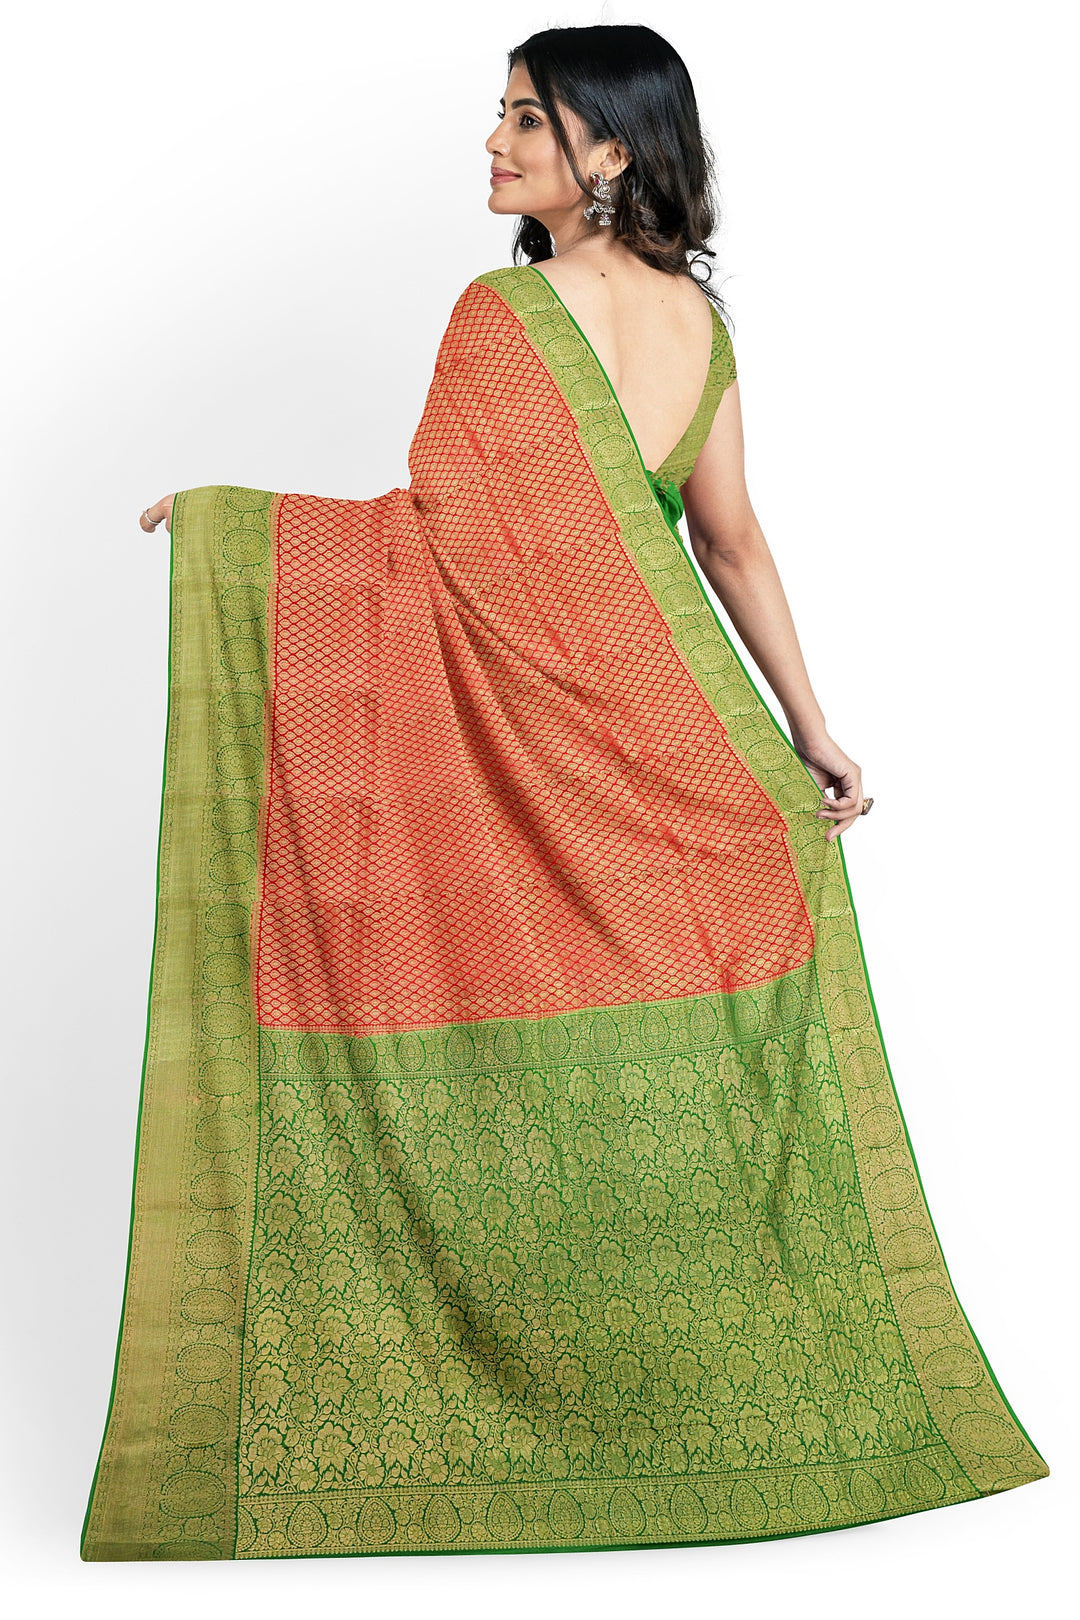 RED PURE CREPE MYSORE SILK SAREE WITH BROCADE DETAILING AND CONTRAST BORDER | SILK MARK CERTIFIED